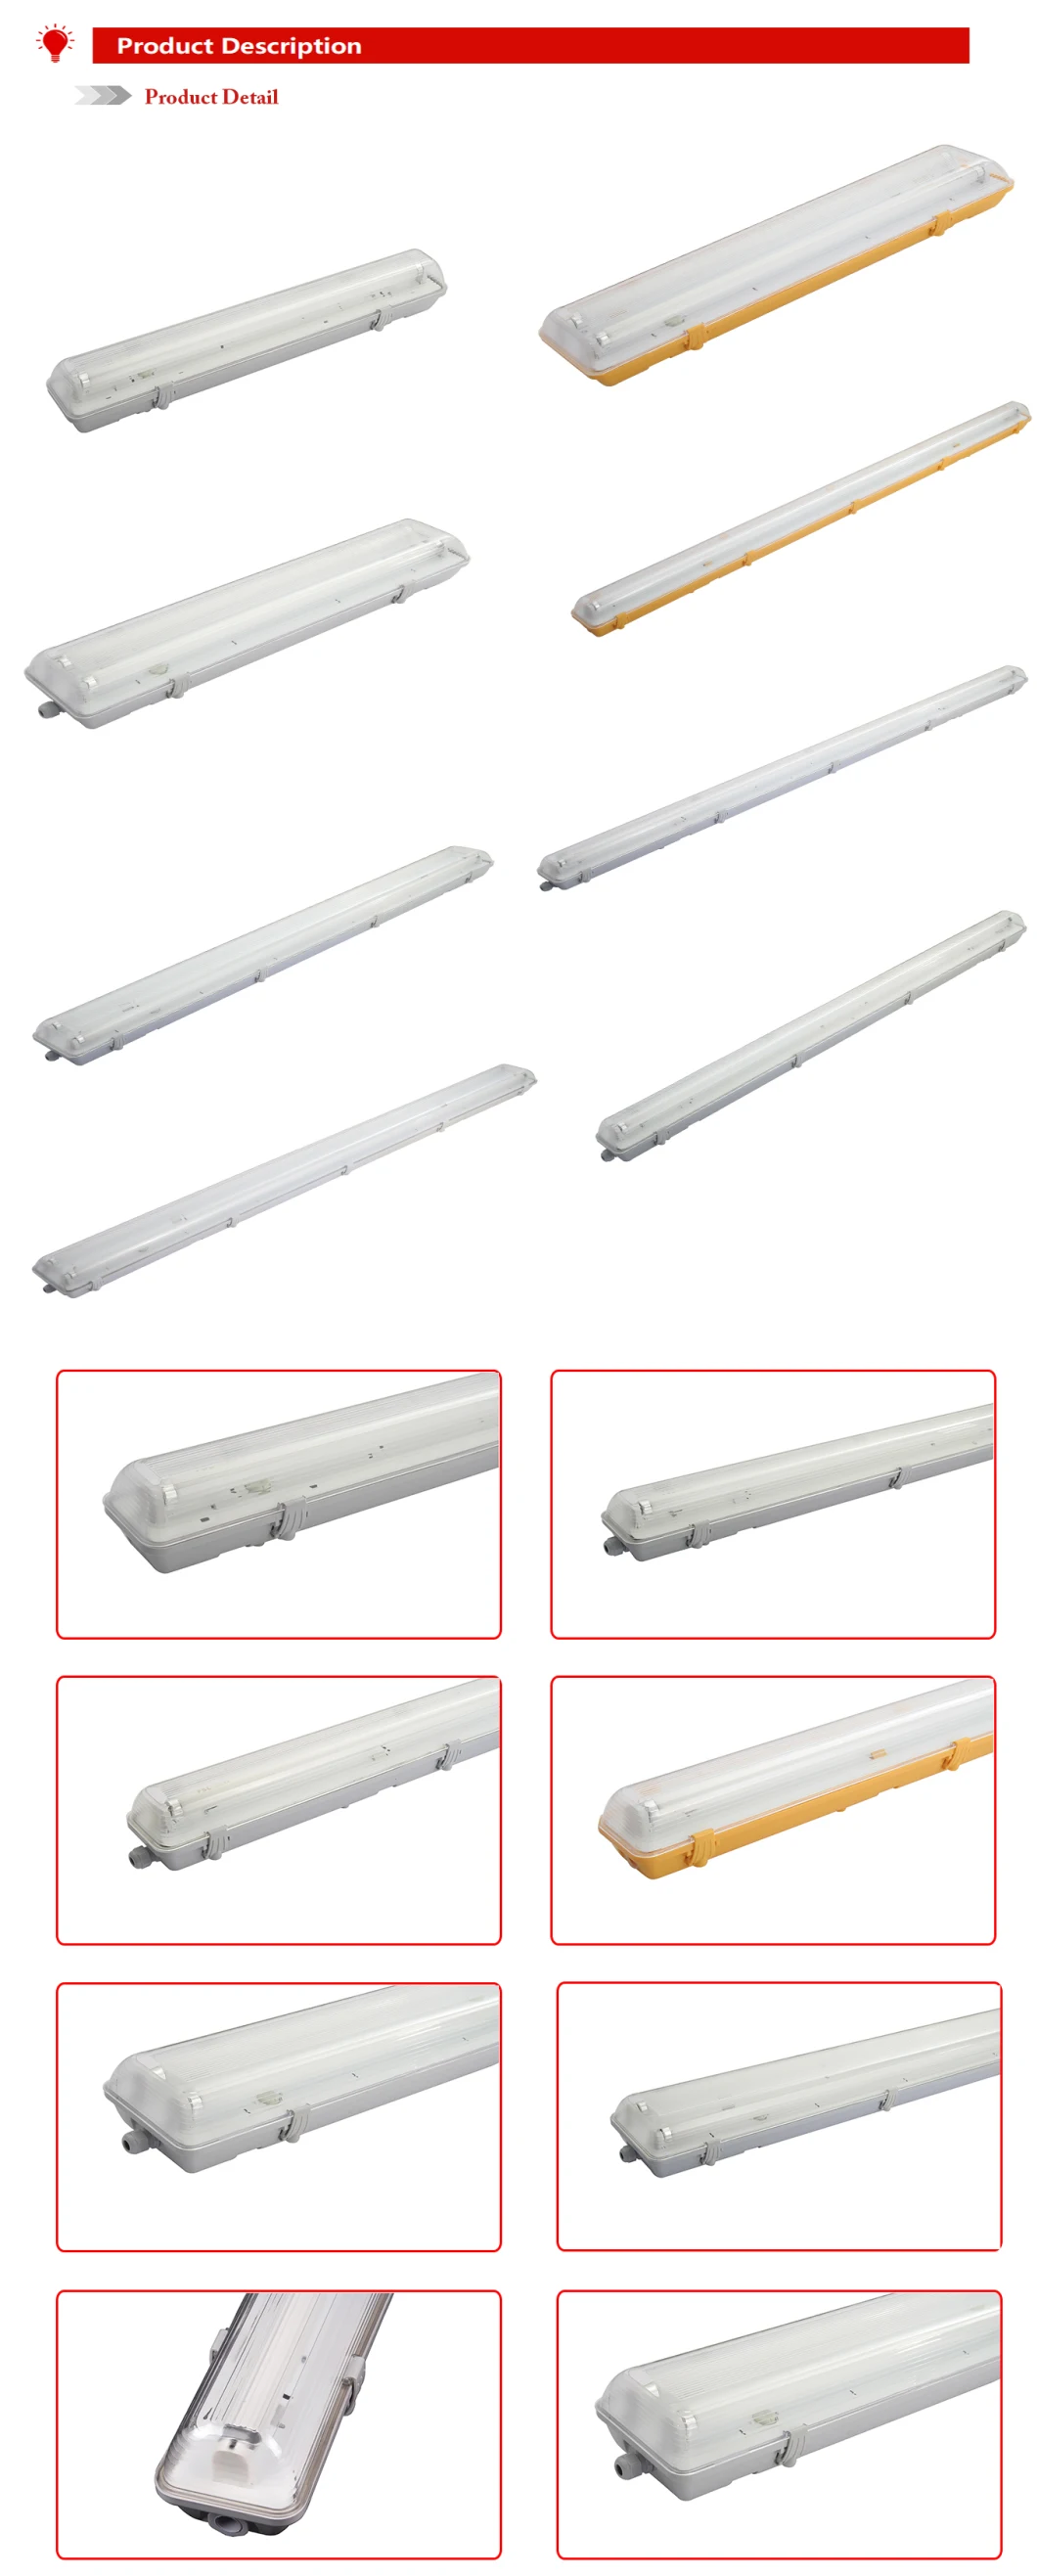 T8 Hanging Fluorescent Light Fixture Cover Clips